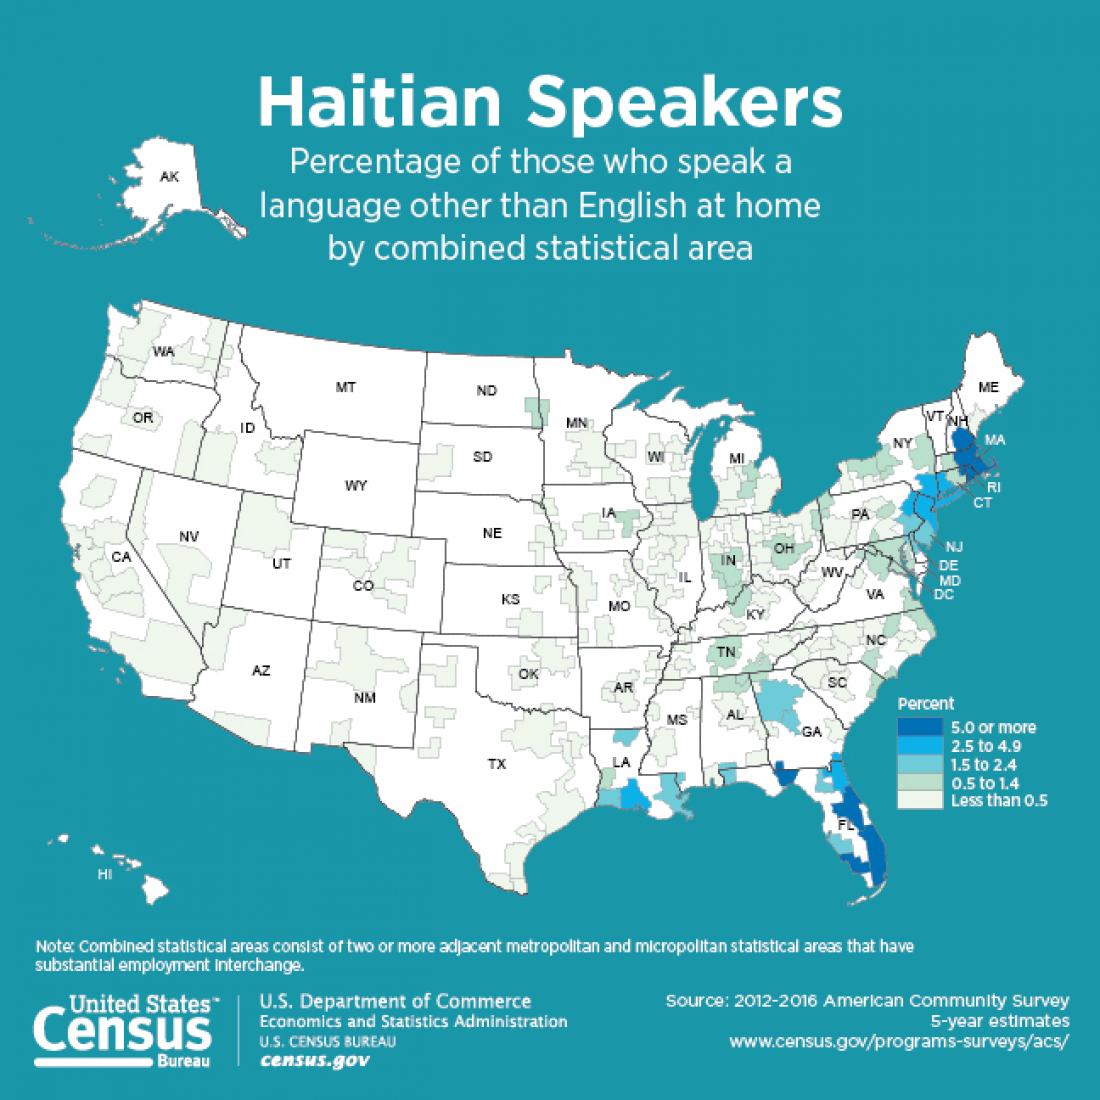 Detailed map showing density of Haitian language speakers across the United States